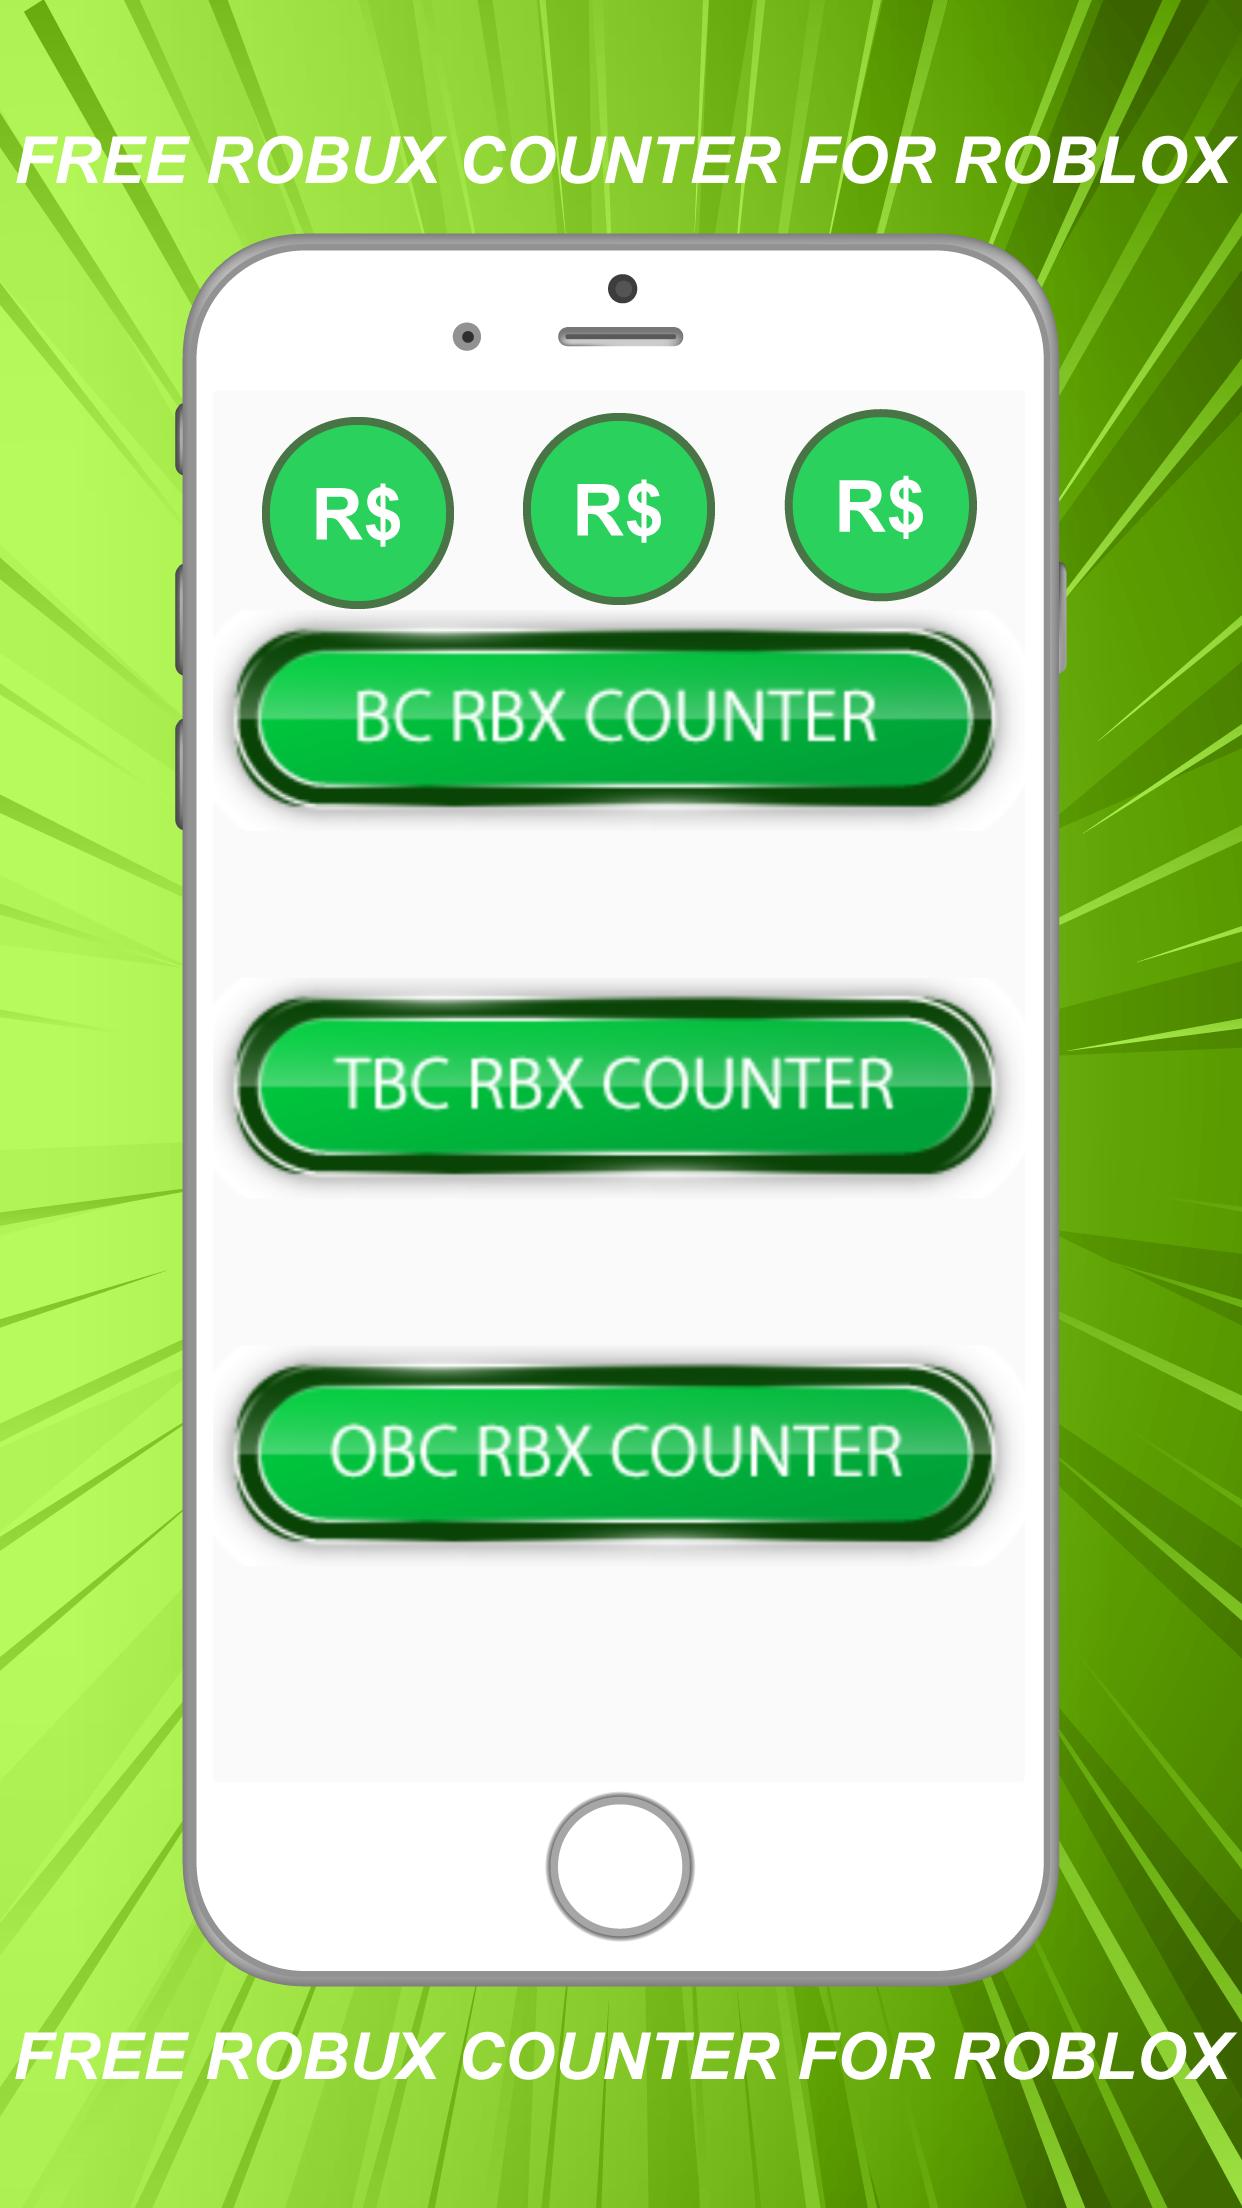 Free Robux Calc For Roblox 2020 For Android Apk Download - free robux calc rbx counter 2020 apps bei google play